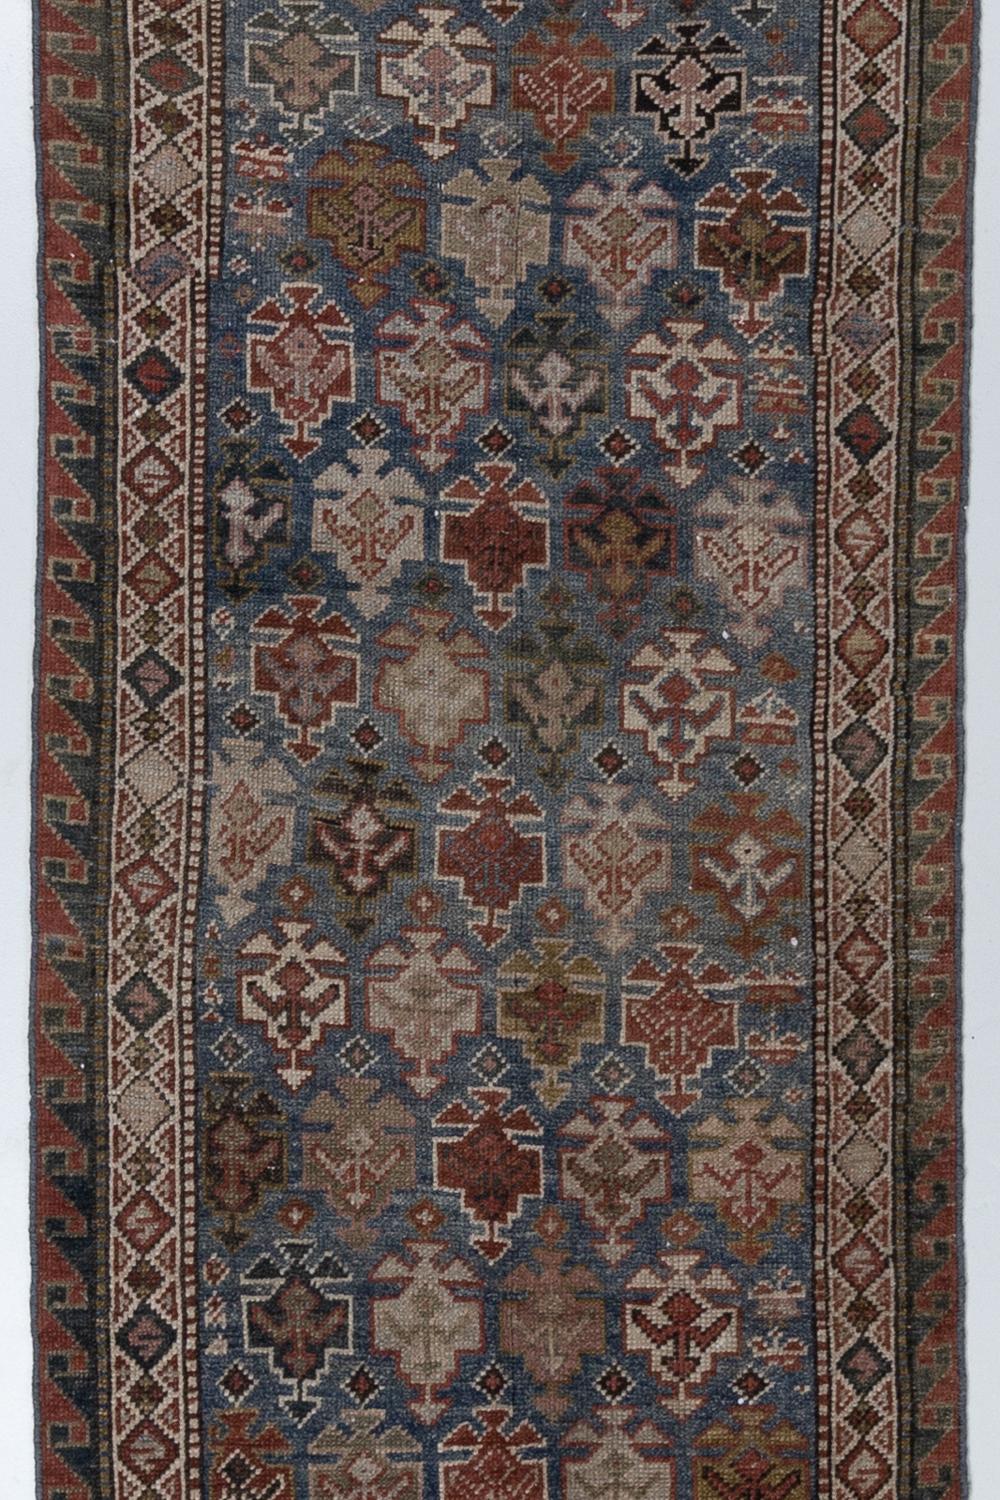 Age: late 20th century

Pile: Low

Wear Notes: 1-2

Material: Wool on wool

Excellent condition antique Persian runner with a blue field and geometric floral motif.

Vintage rugs are made by hand over the course of months, sometimes years.